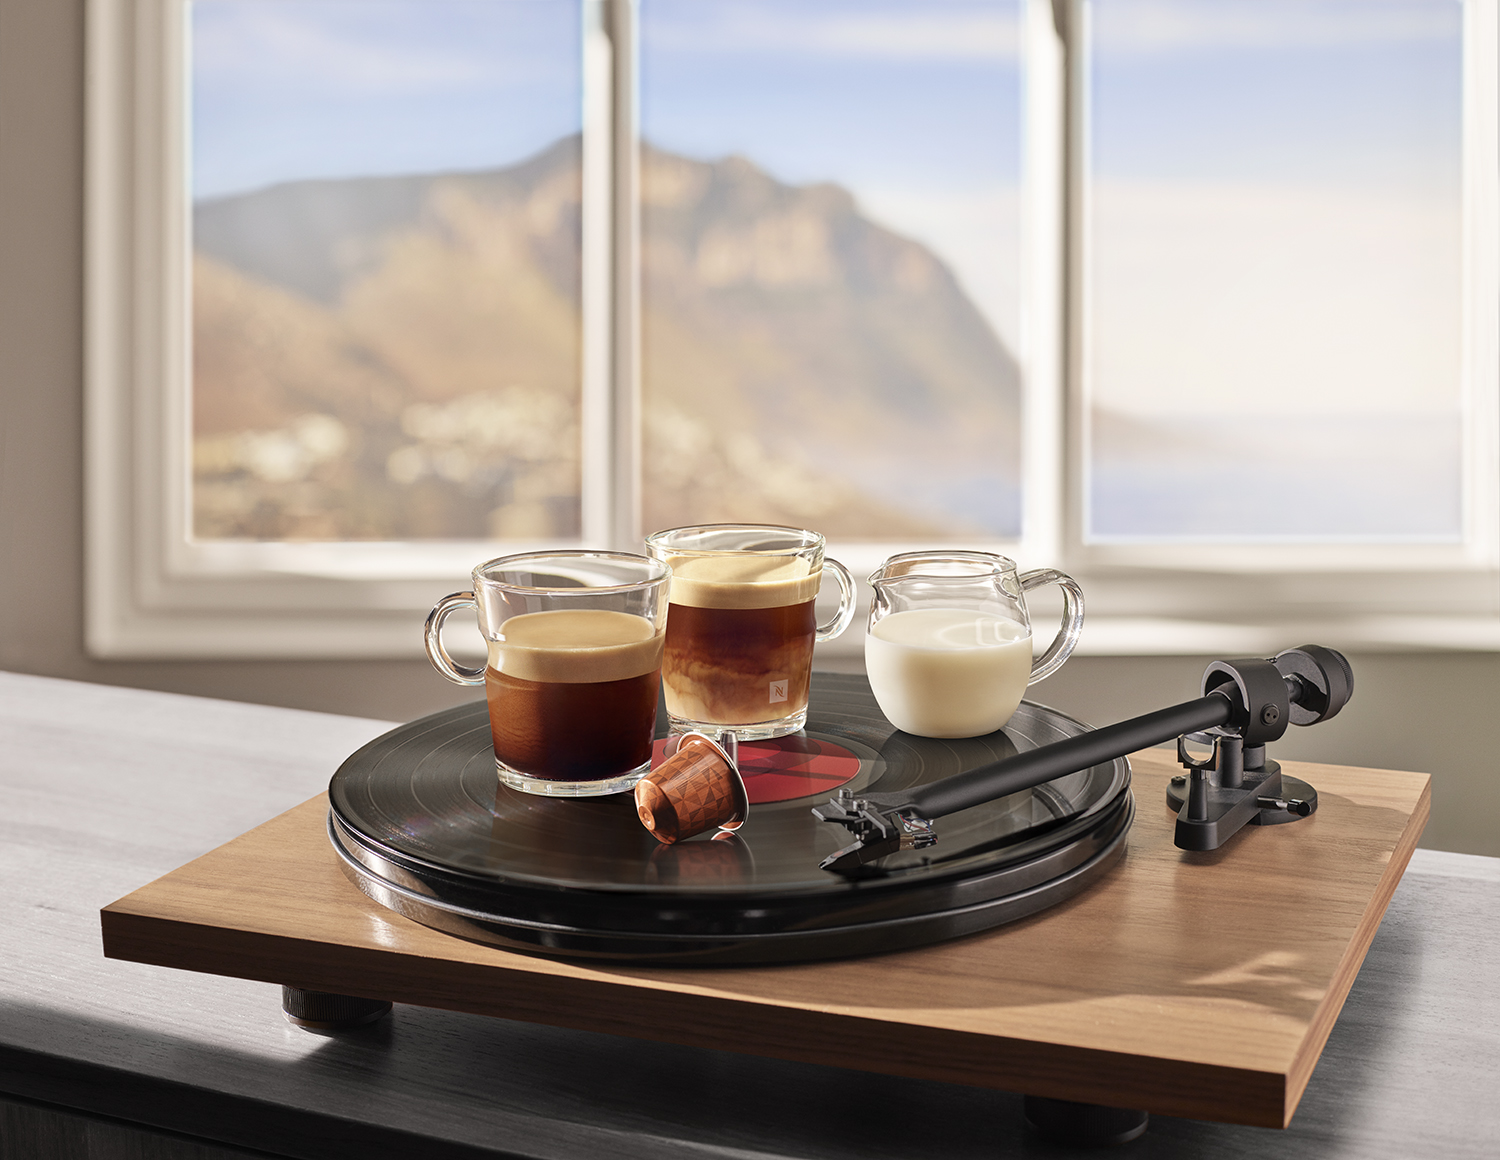 You are currently viewing Nespresso World Explorations coffee